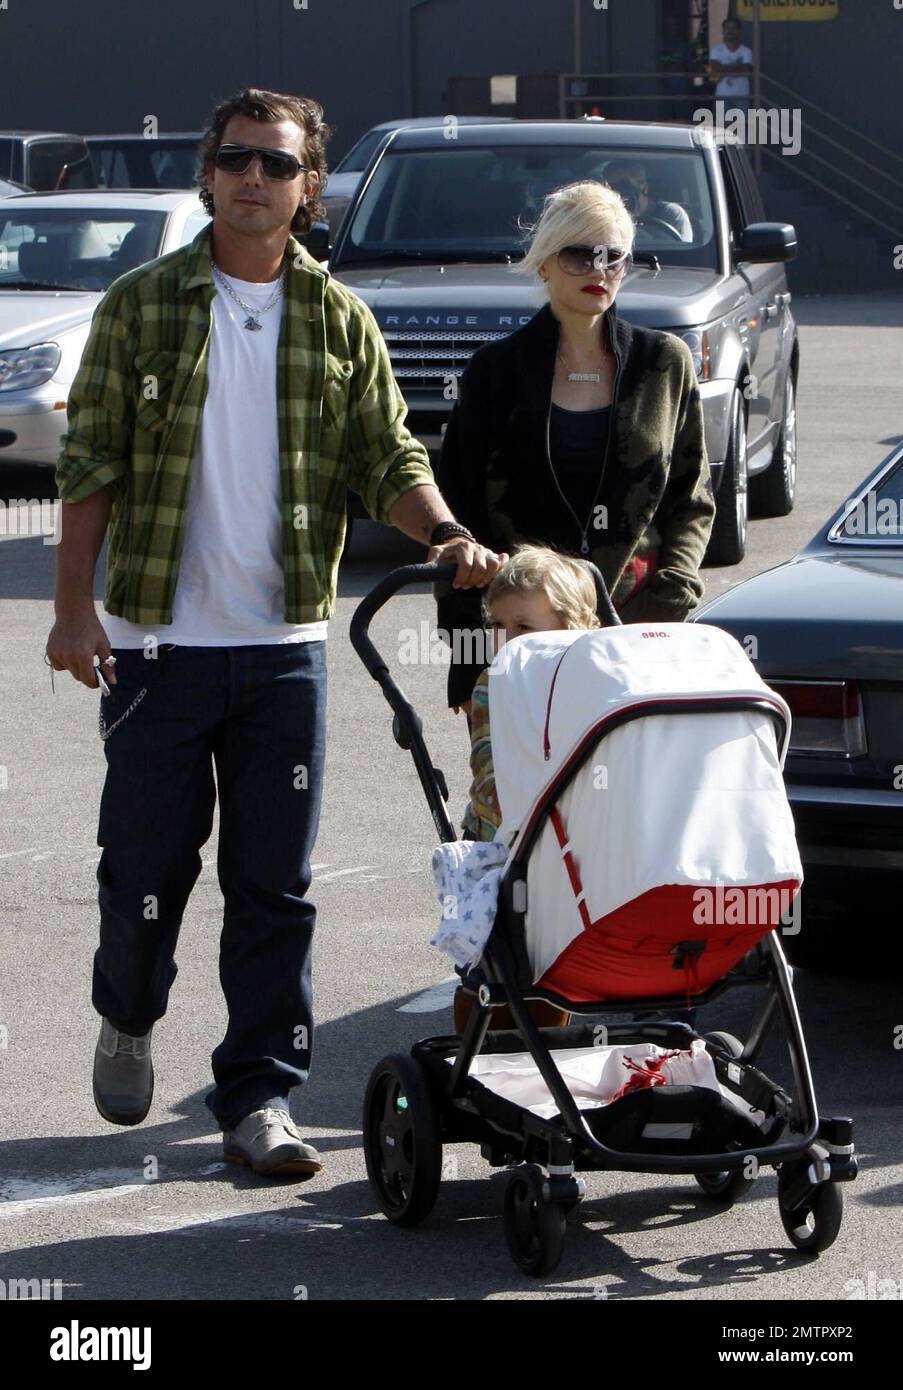 Gwen Stefani and Gavin Rossdale take sons Kingston and baby Zuma on a family shopping outing, stopping in at a local gourmet food store and at a Lakeshore Learning Materials store nearby. Little Zuma napped in his stroller while Kingston rode along, standing on a platform attached to the back. After shopping at Lakeshore, Gavin pushed a cart overflowing with bags of goodies from Lakeshore as Gwen took care of getting the kids back to the car. Los Angeles, CA. 11/29/08. Stock Photo